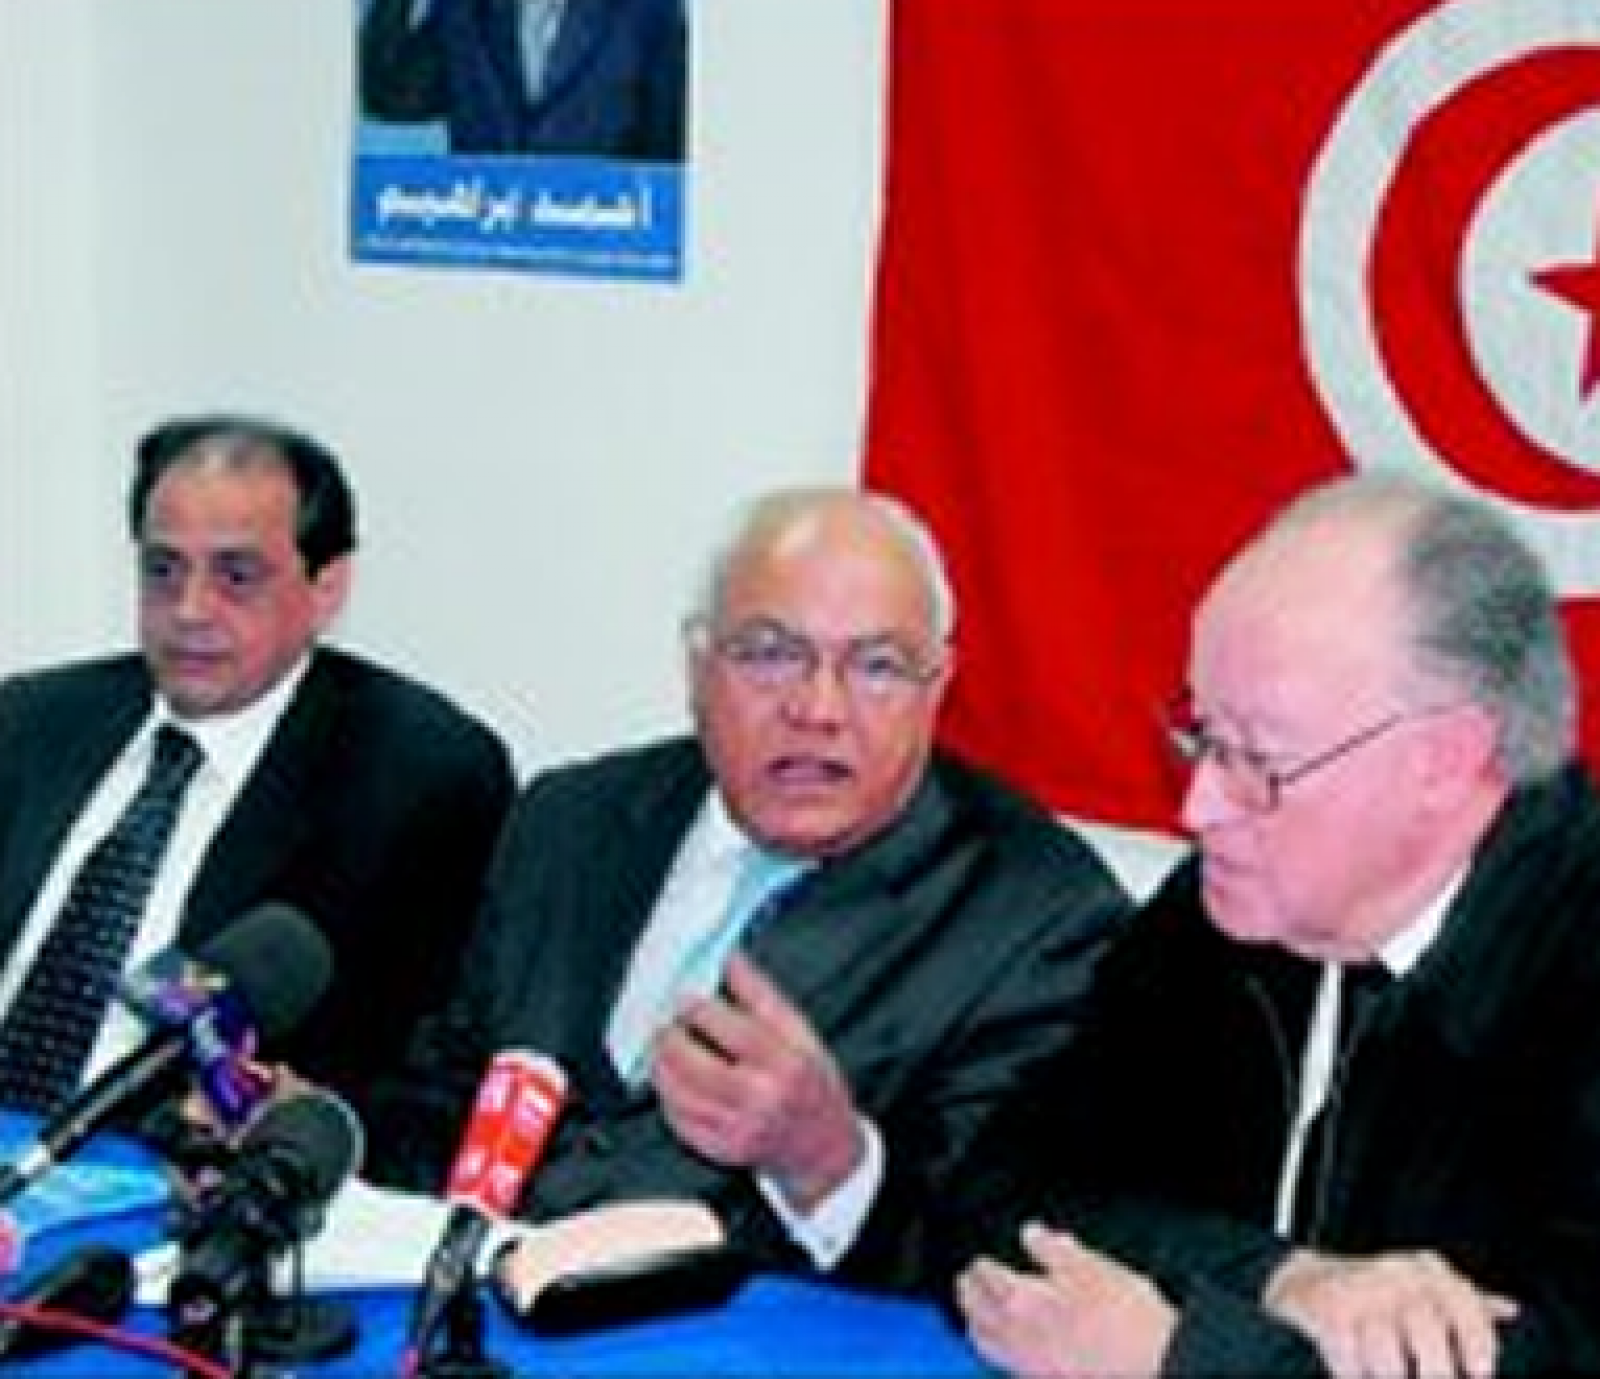 Tunisian Political Parties Unite to Observe Voting on Election Day